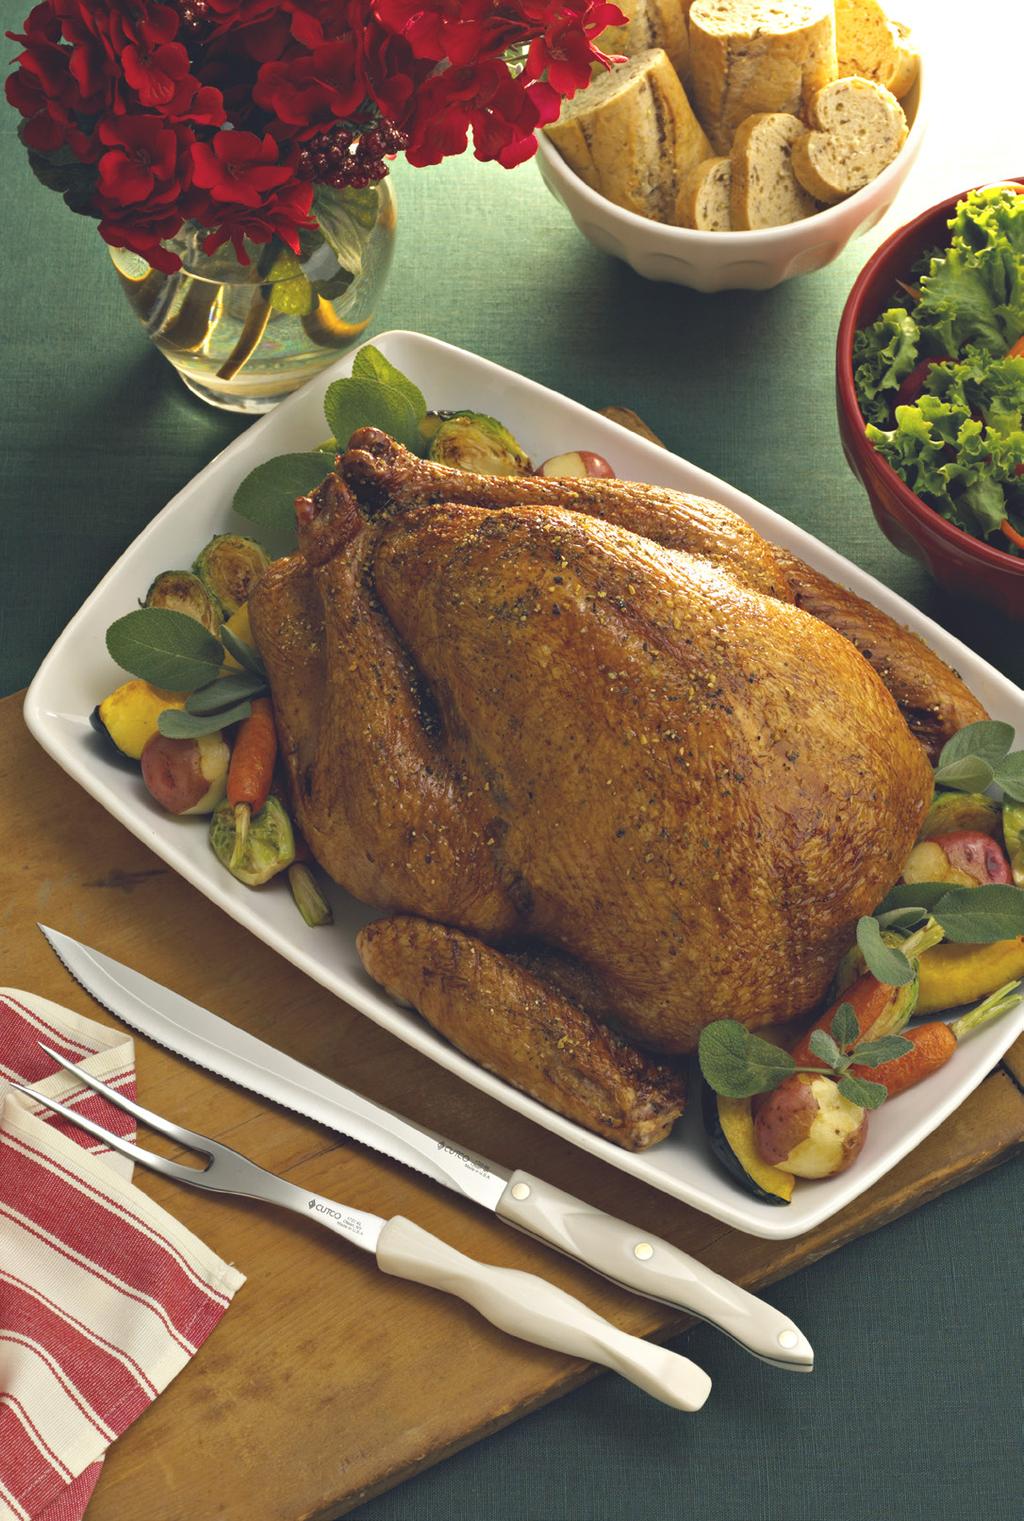 Roasted Butter Herbed Turkey From Certified Master Chef, Fritz Sonnenschmidt Ingredients 3/4 cup of softened butter 1-1/2 teaspoons poultry seasoning 2 teaspoons finely minced garlic 2 tablespoons